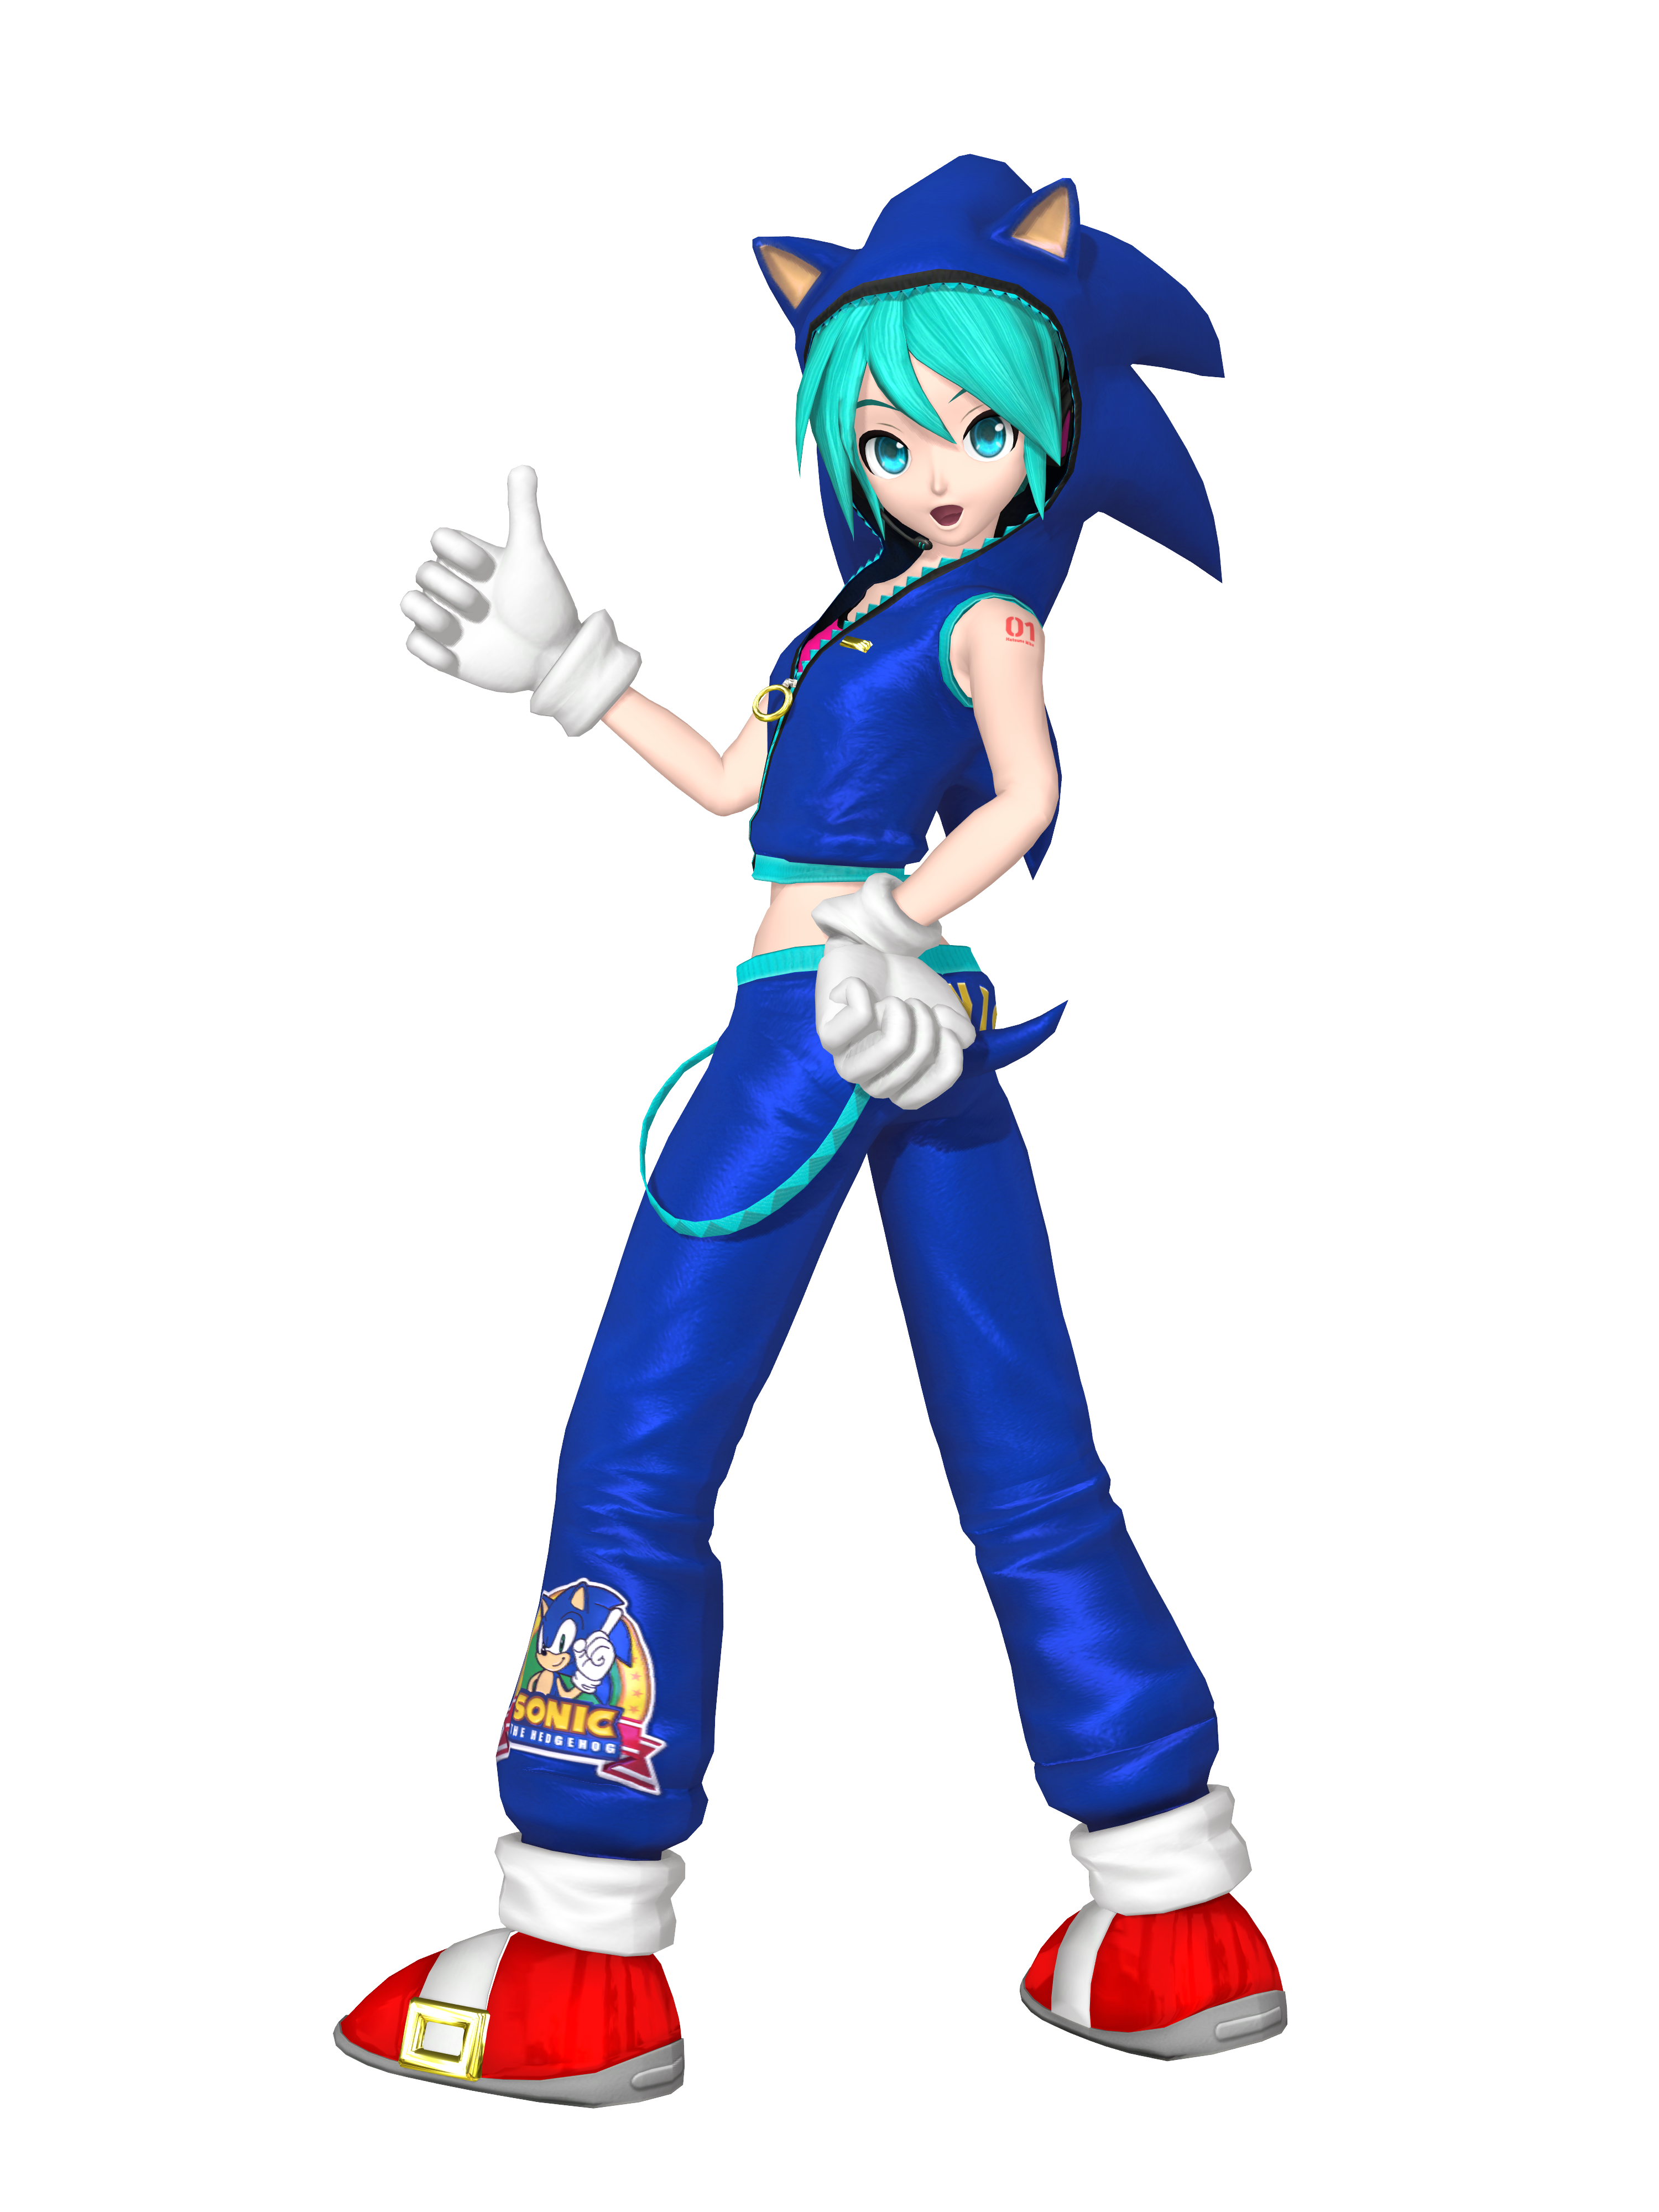 MMD - : DTE Sonic Style Miku.